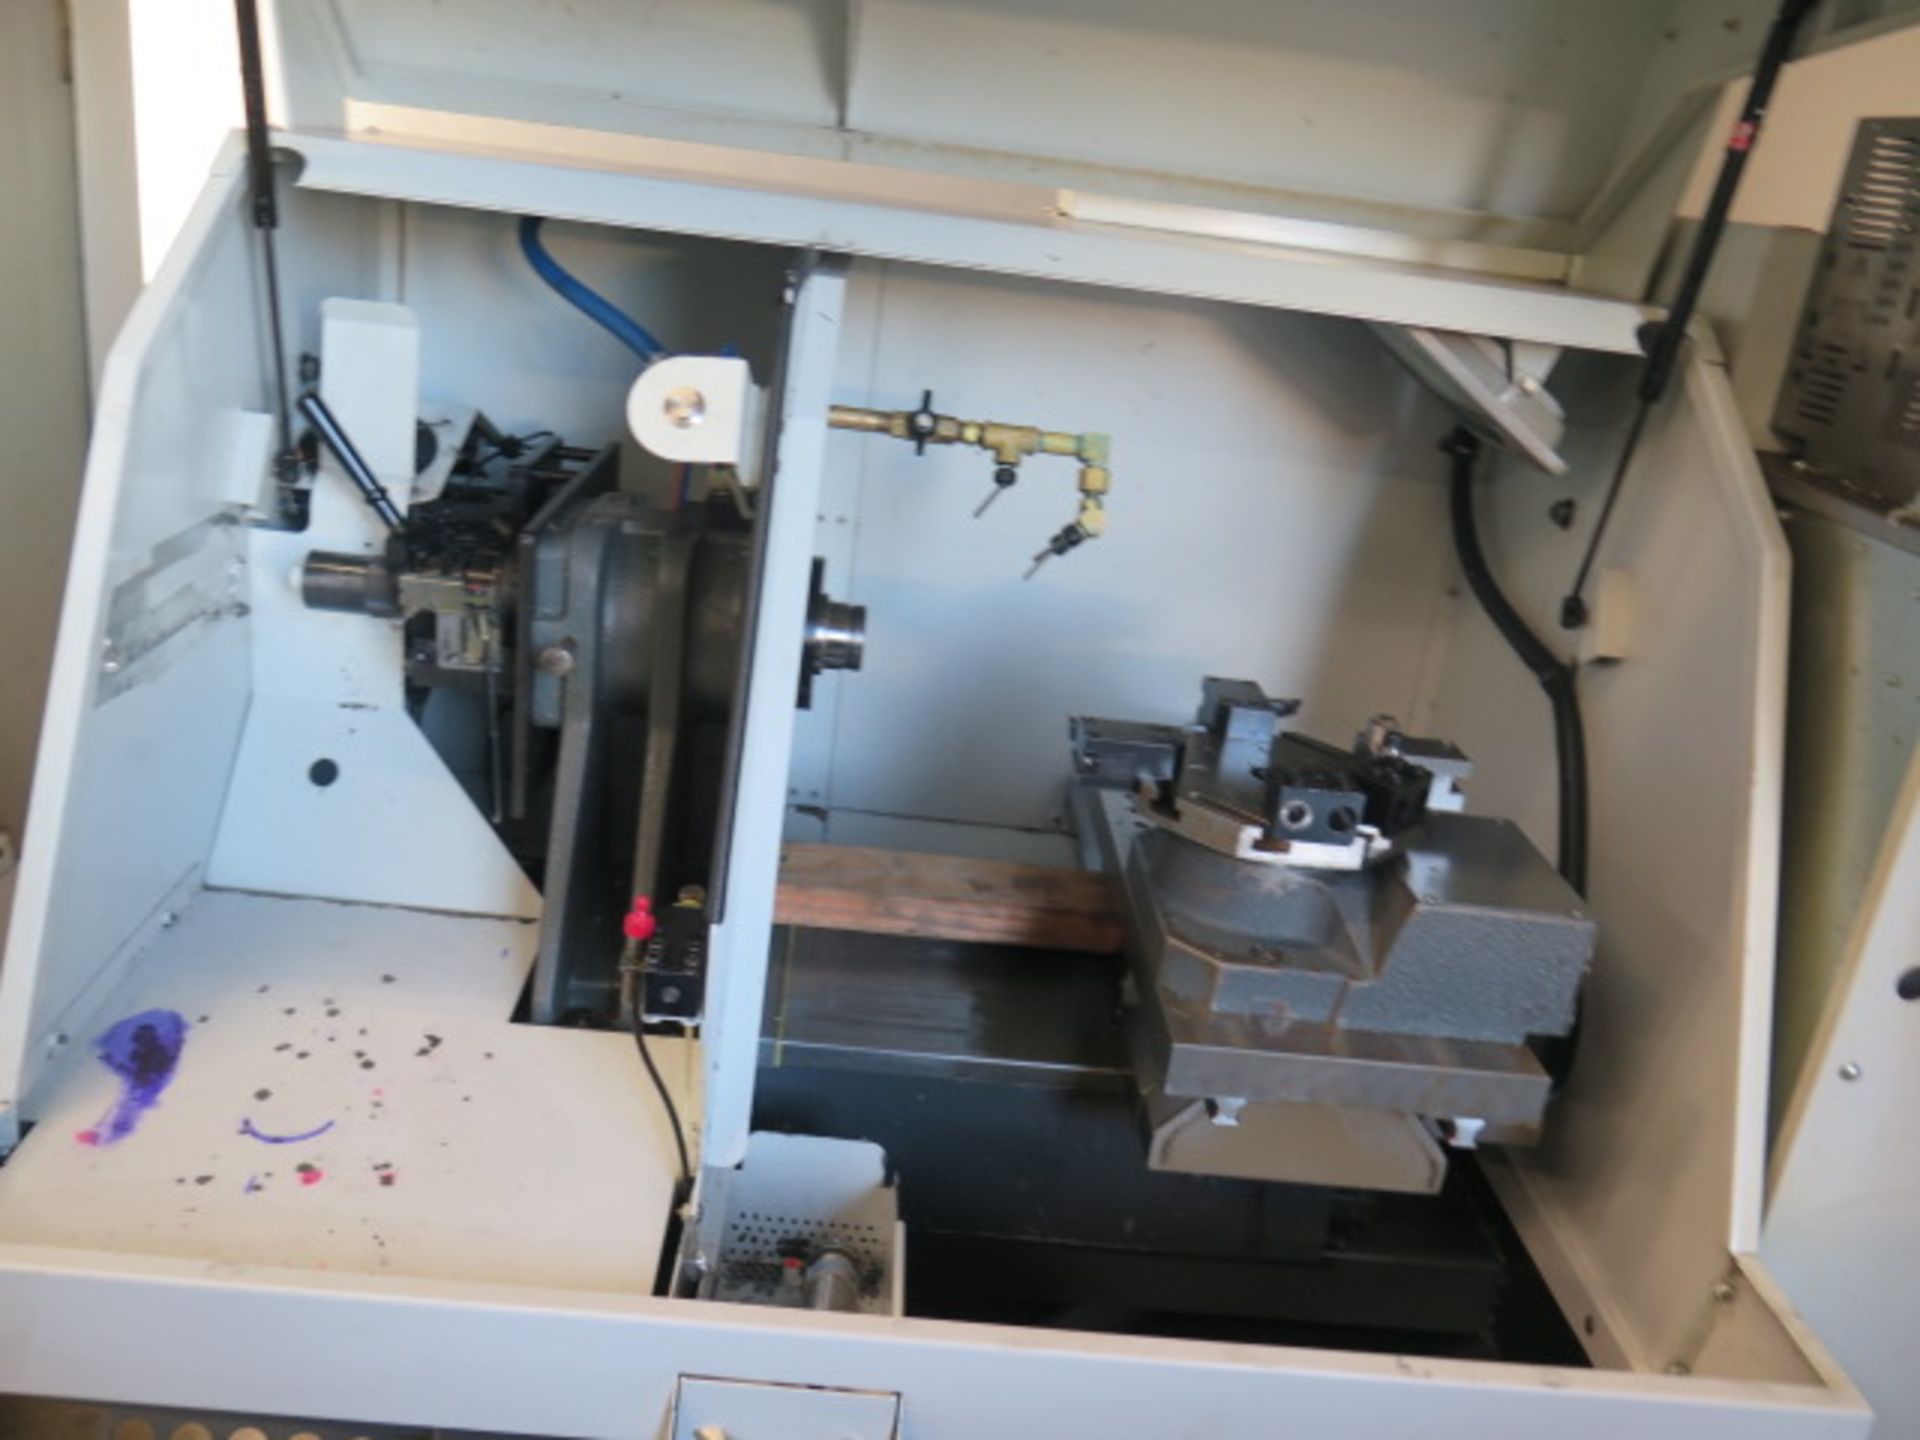 2018 Haas CL-1 CNC Chucker Office Lathe s/n 3110038 w/Haas Controls, 8-Station, 5C Collet,SOLD AS IS - Image 6 of 12